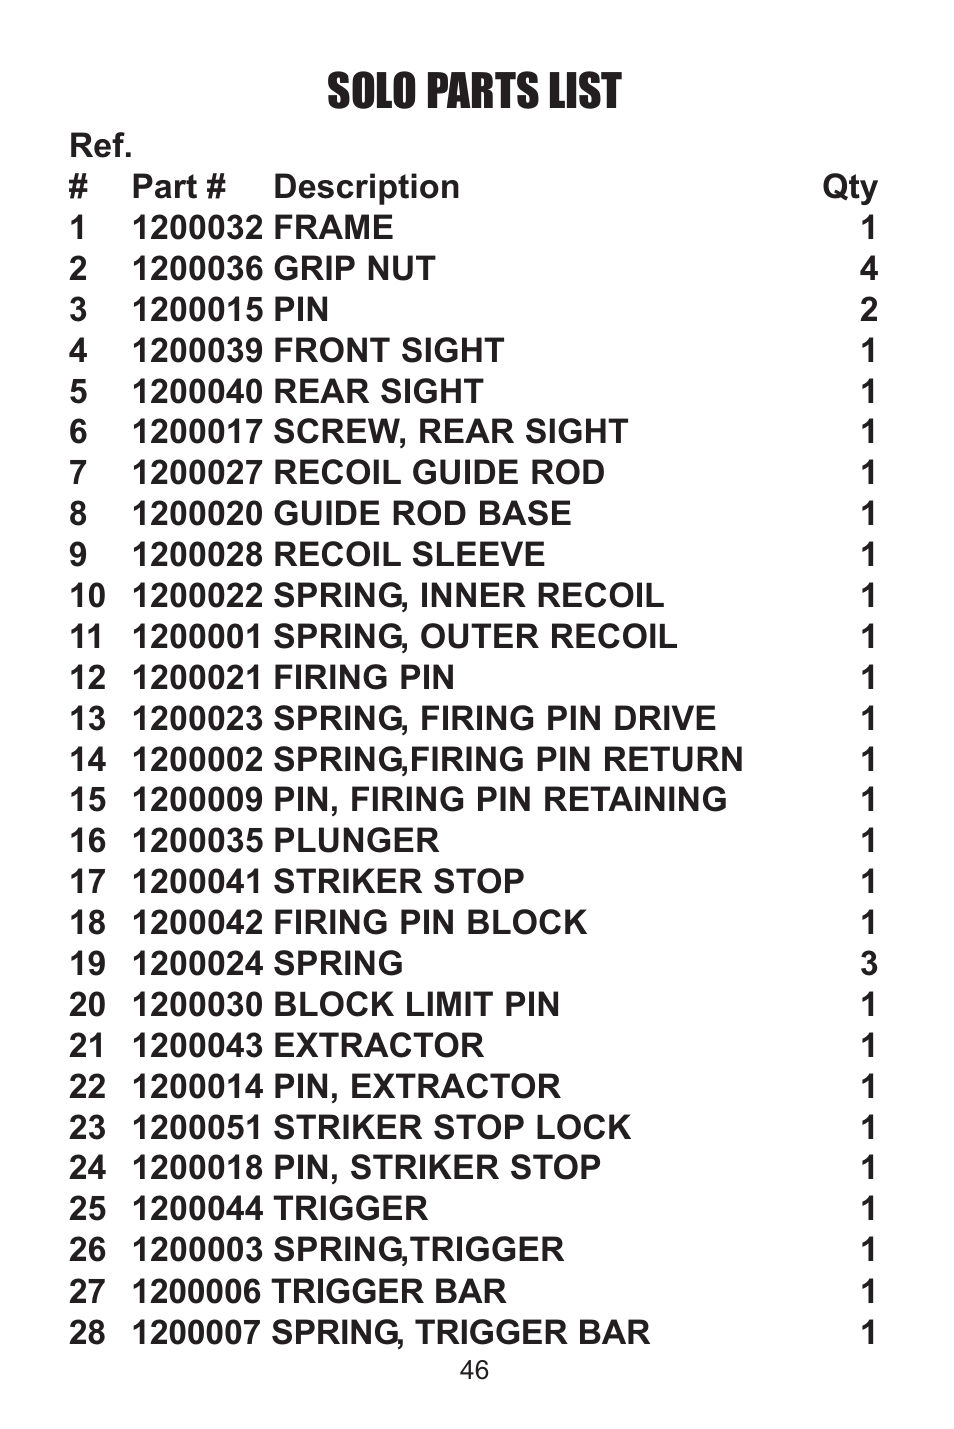 Solo parts list | Kimber Solo User Manual | Page 46 / 48